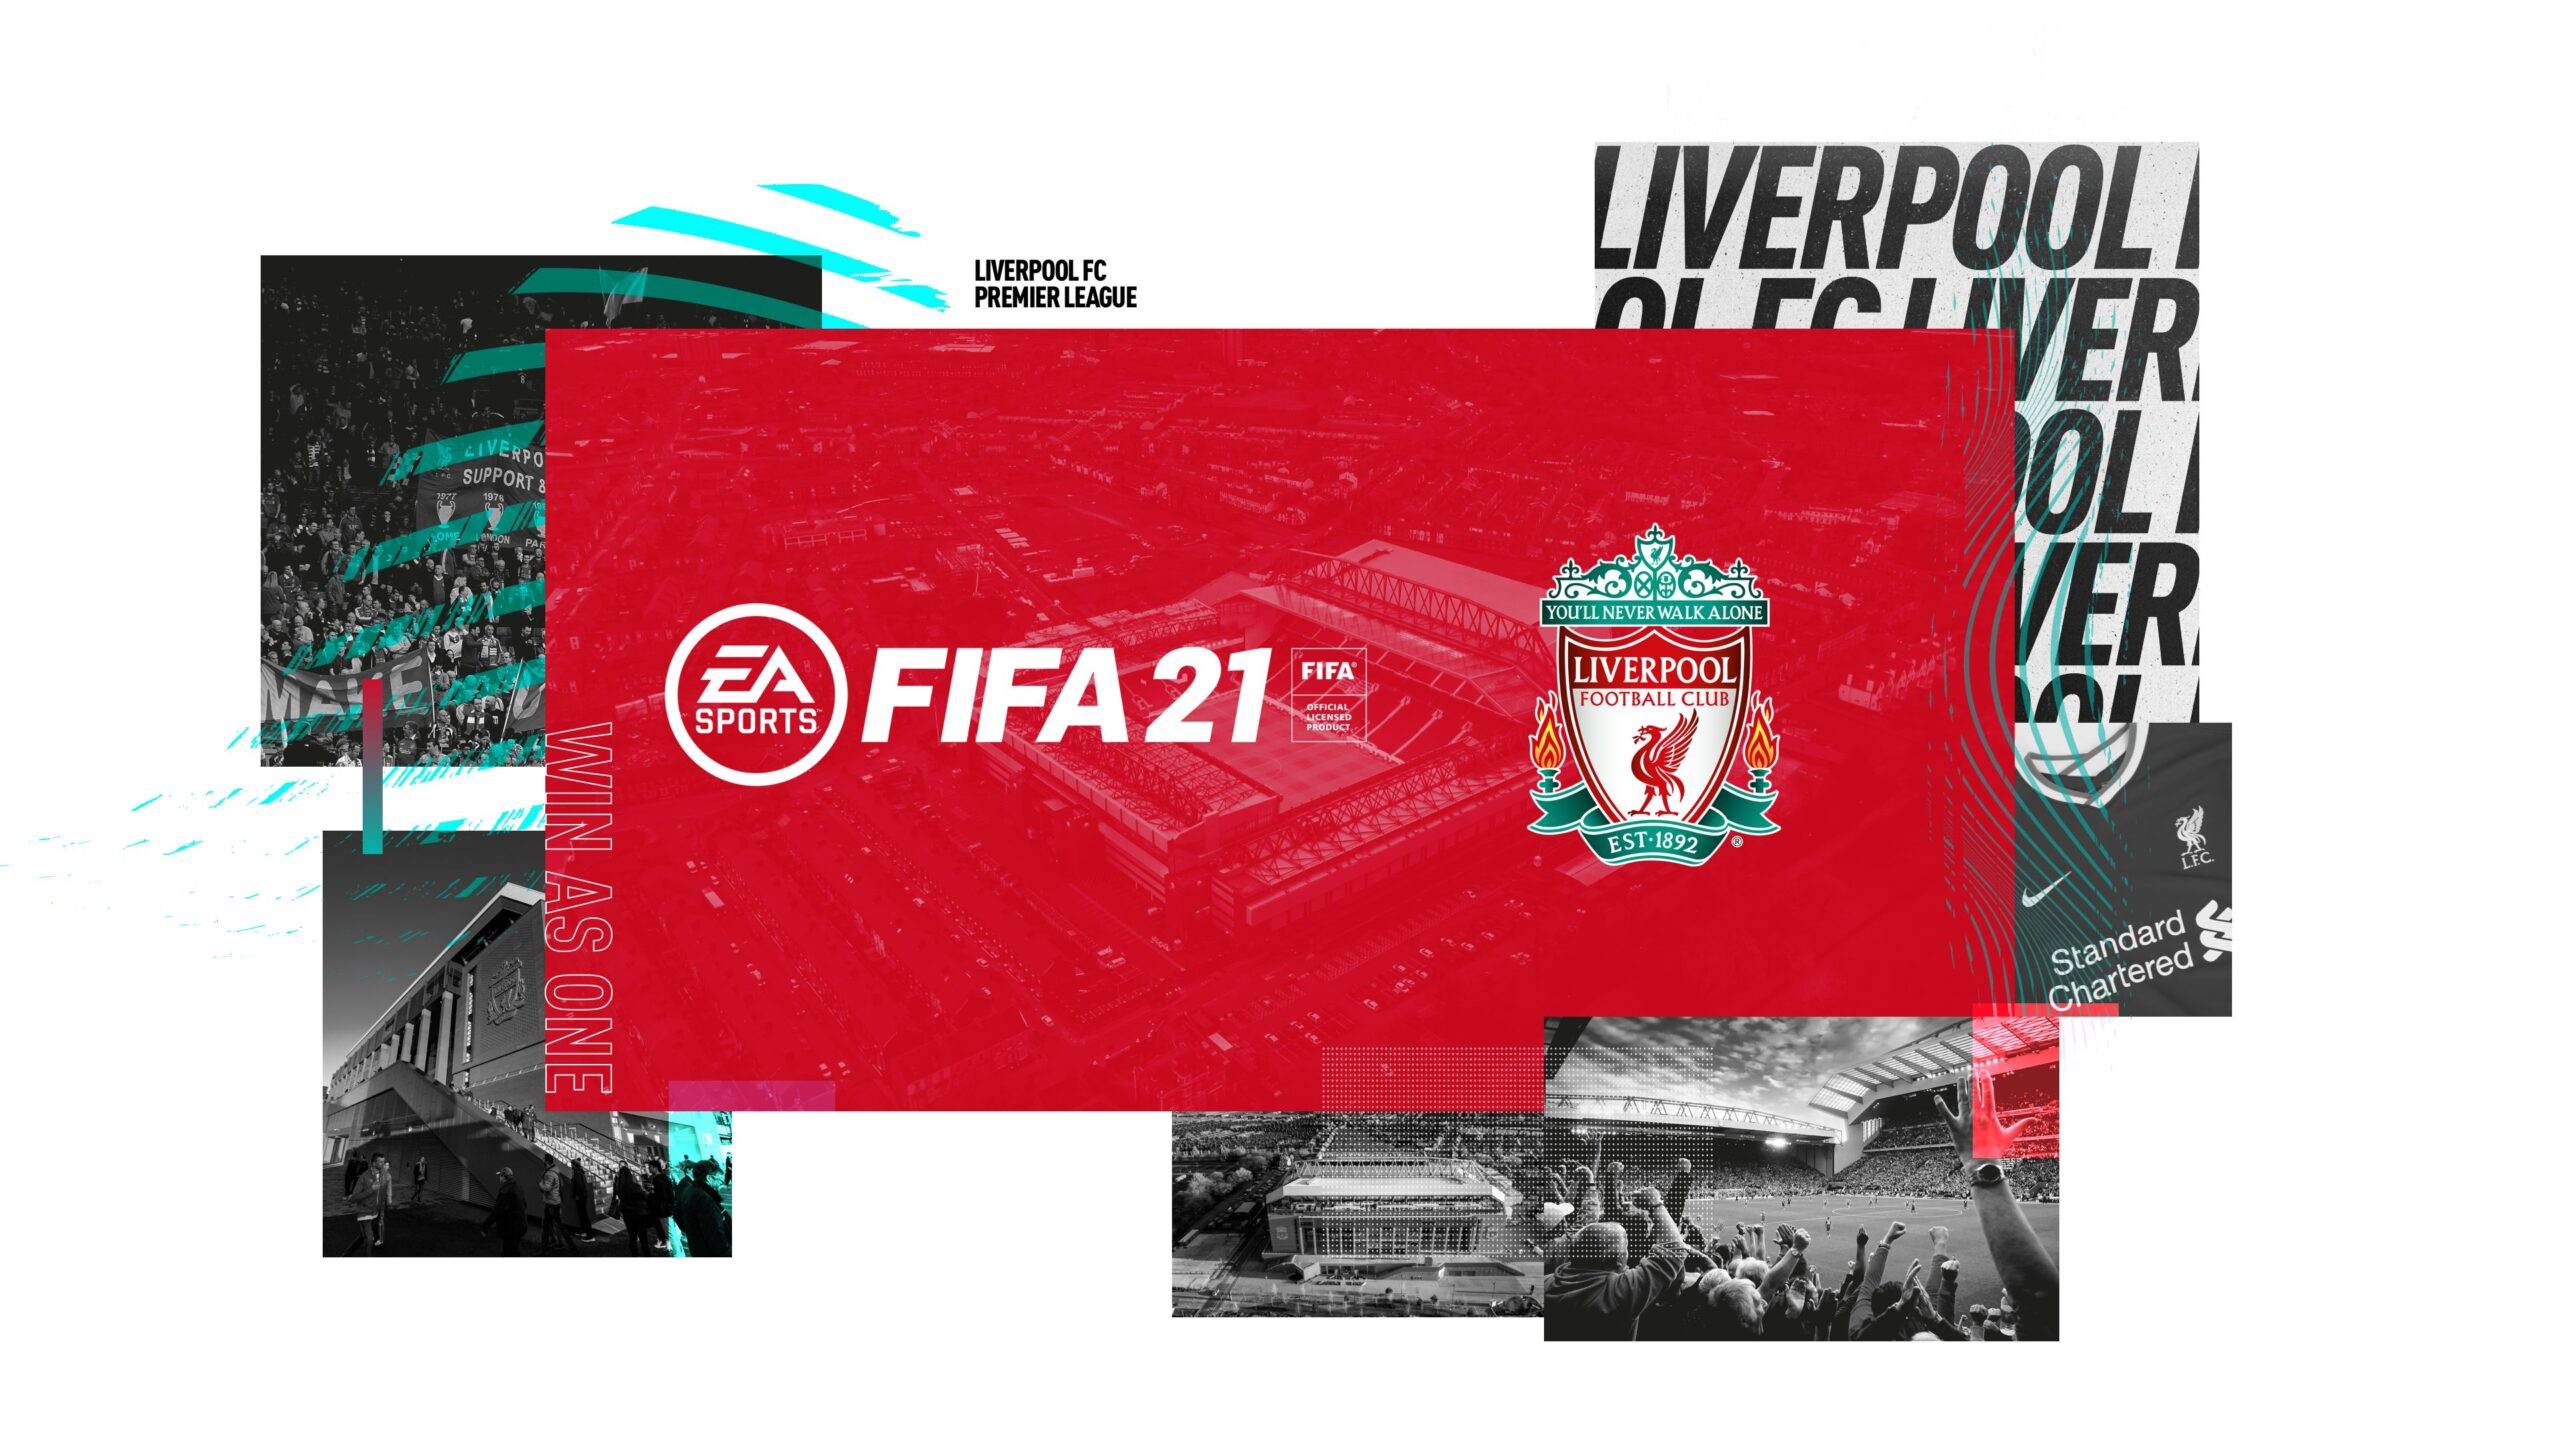 Fifa 21 Covers And Wallpapers For Premier League Teams Available Fifaultimateteam It Uk We have 76+ amazing background pictures carefully picked by our community. fifa 21 covers and wallpapers for